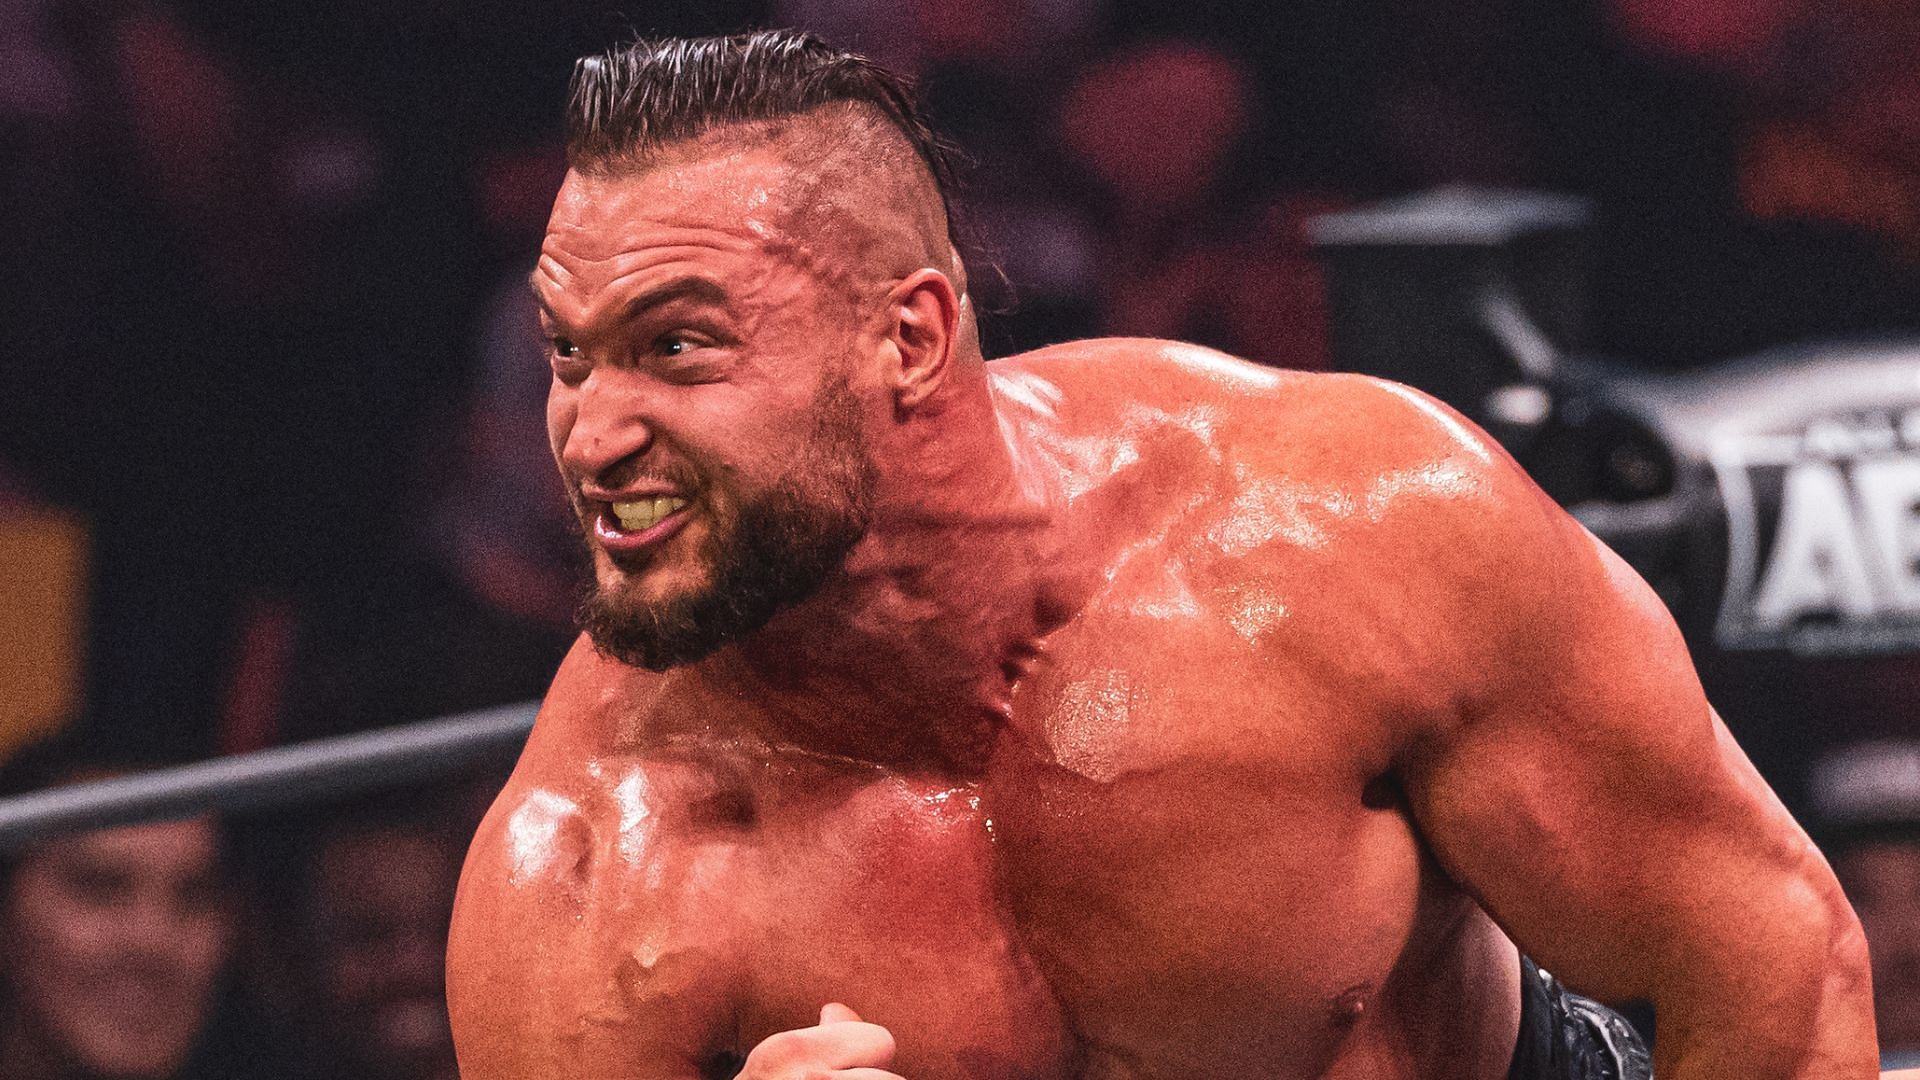 Wardlow at an AEW Dynamite event in 2022 (credit: Jay Lee Photography)